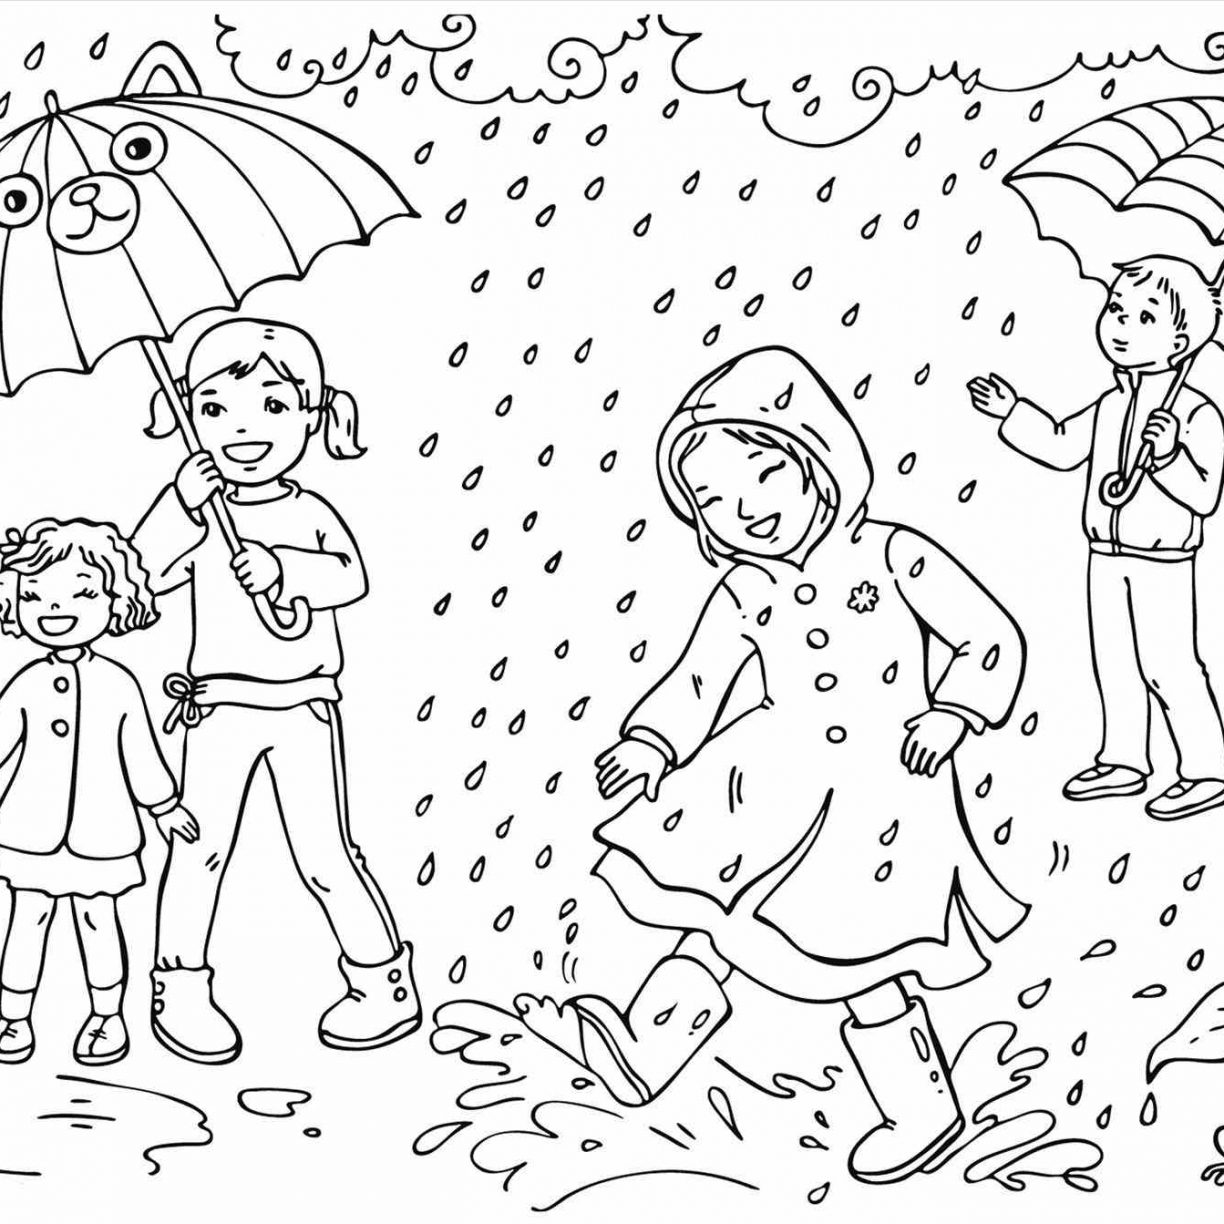 Weather Coloring Pages For Kids at Free printable